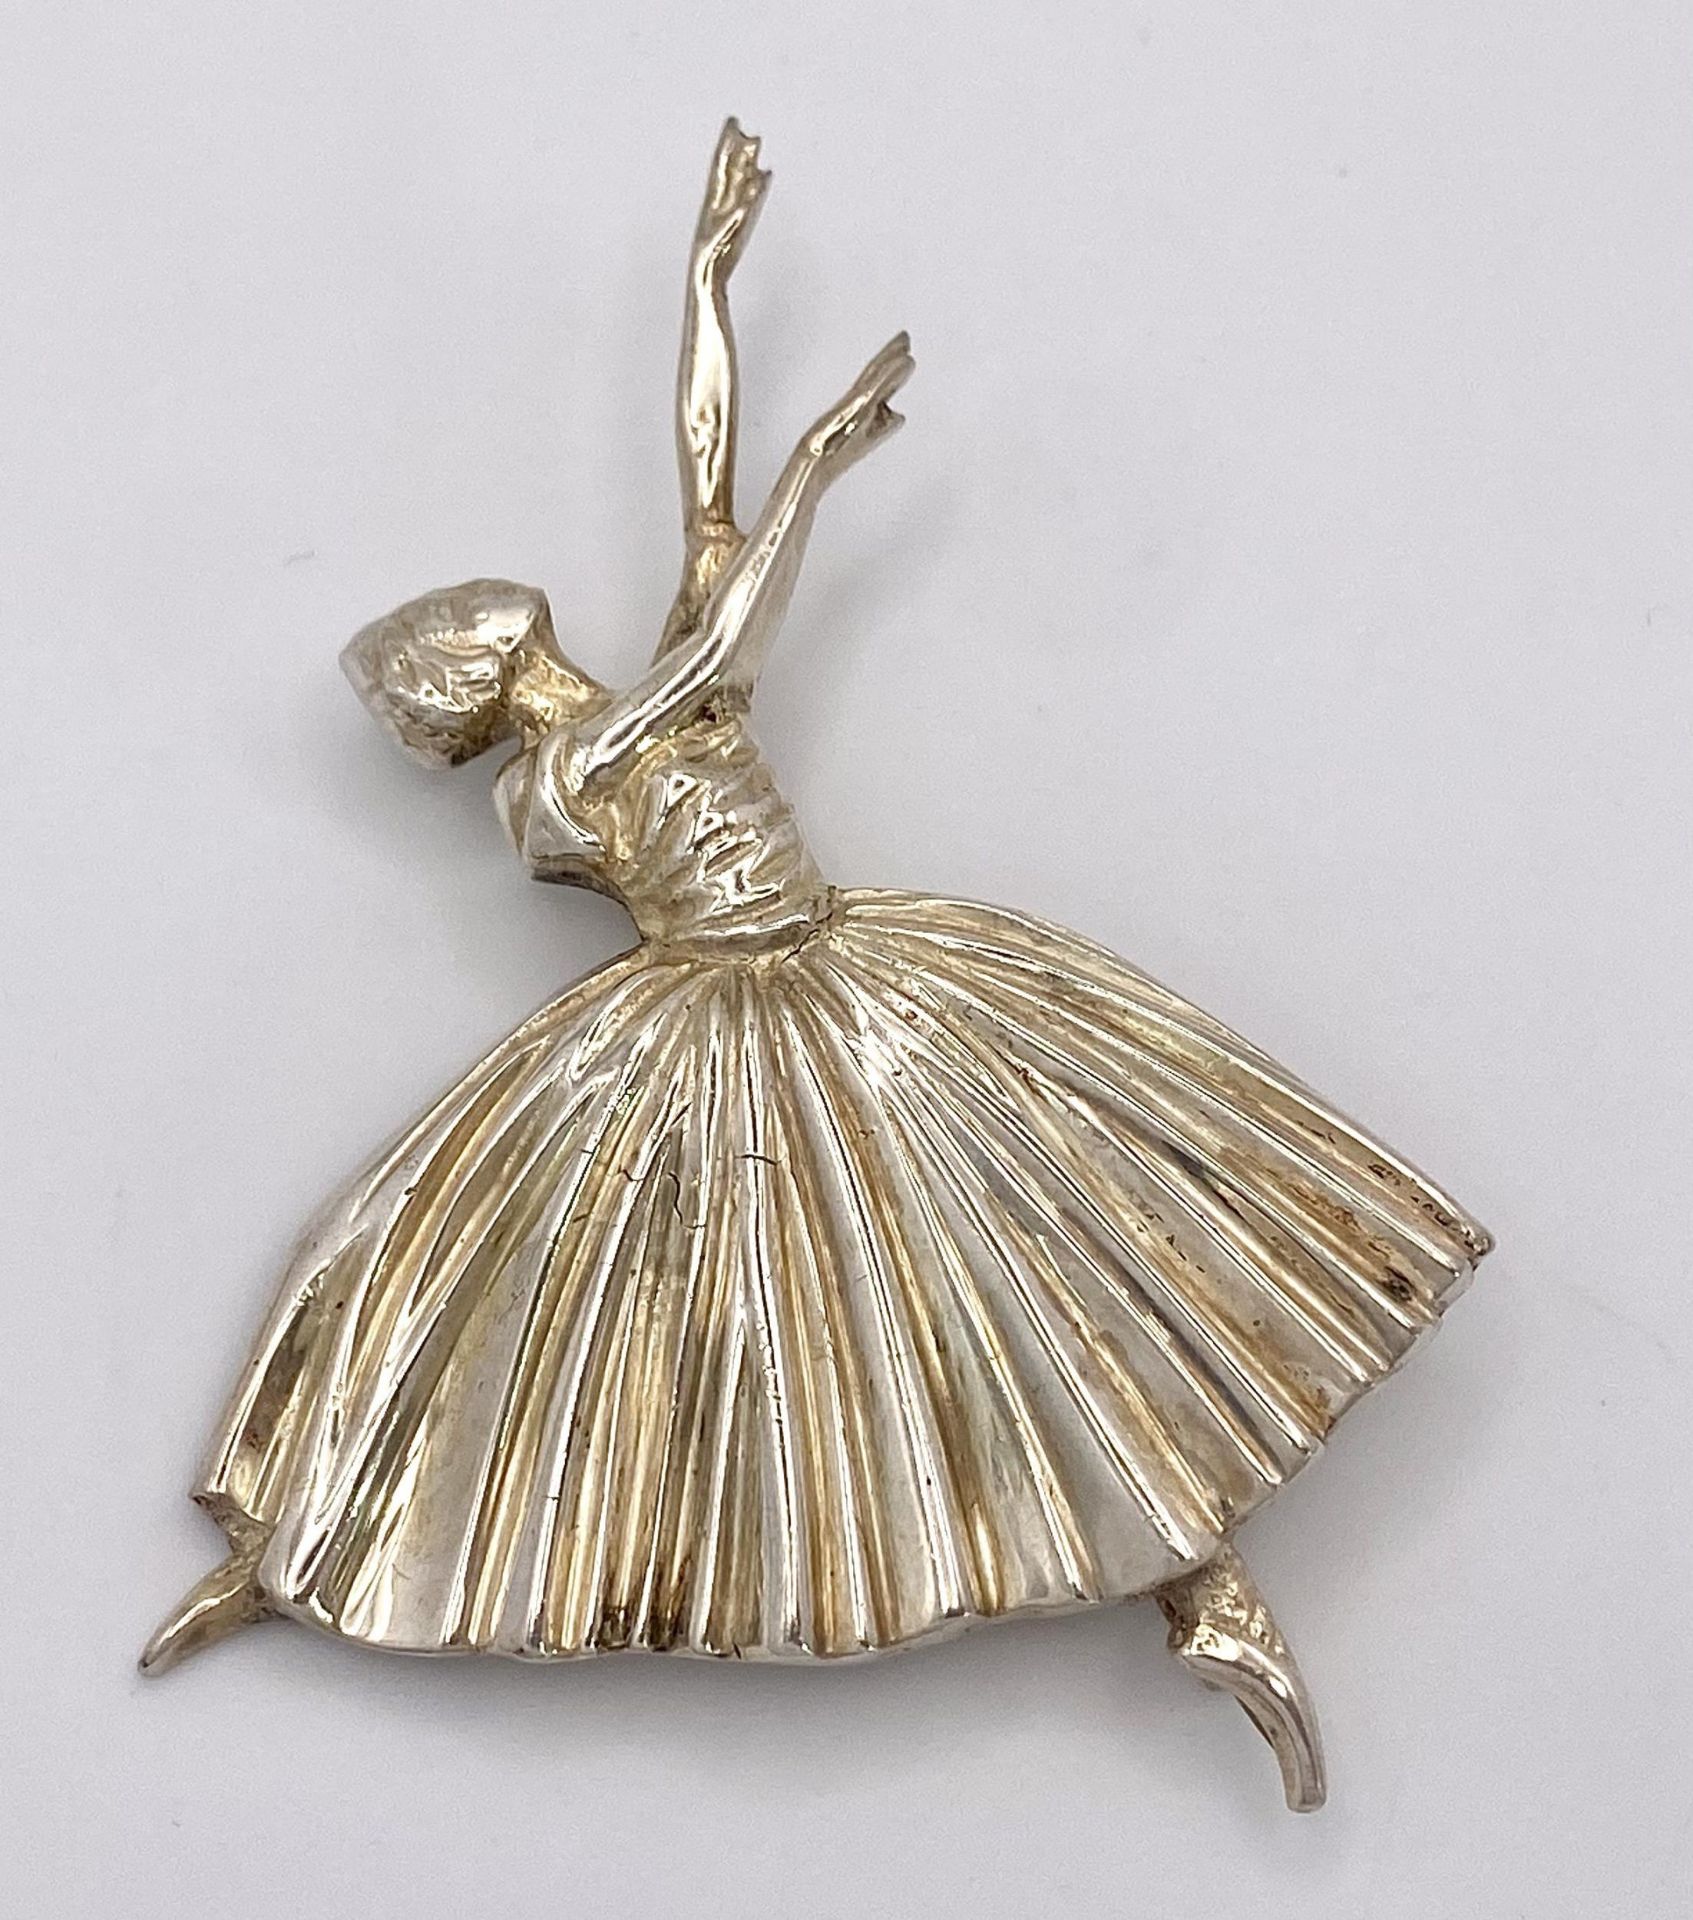 A Beautifully Crafted Vintage Hallmarked 1948/9 Silver Ballerina Brooch by the Birmingham